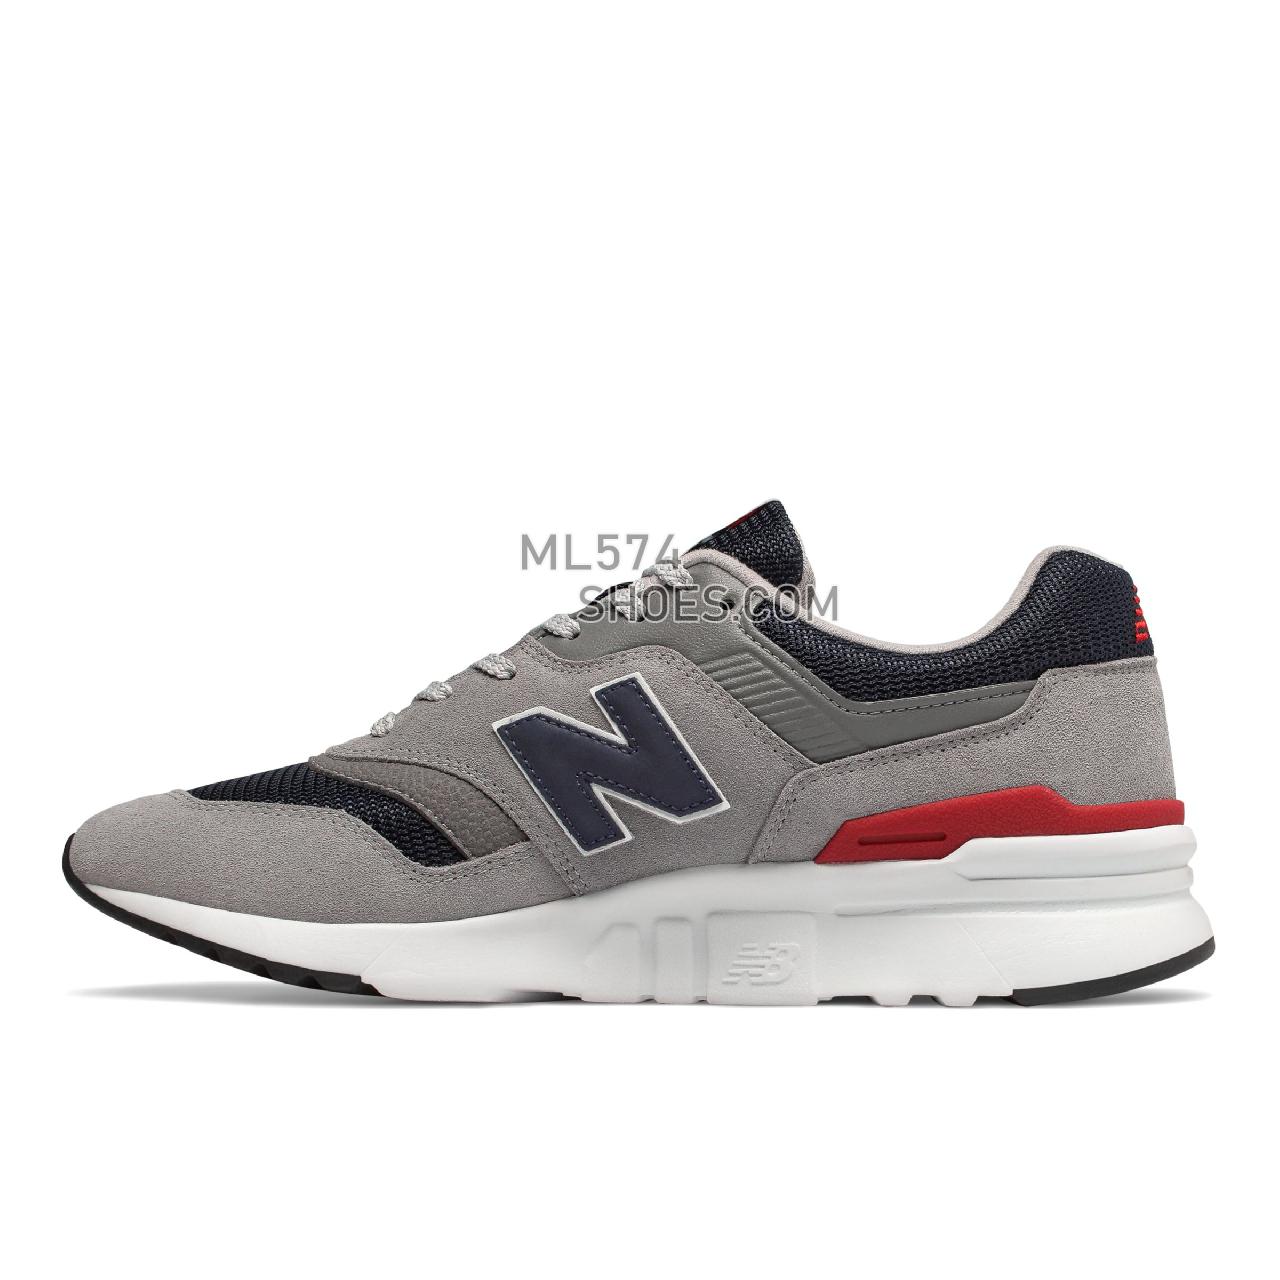 New Balance 997H - Men's Sport Style Sneakers - Team Away Grey with Pigment - CM997HCJ